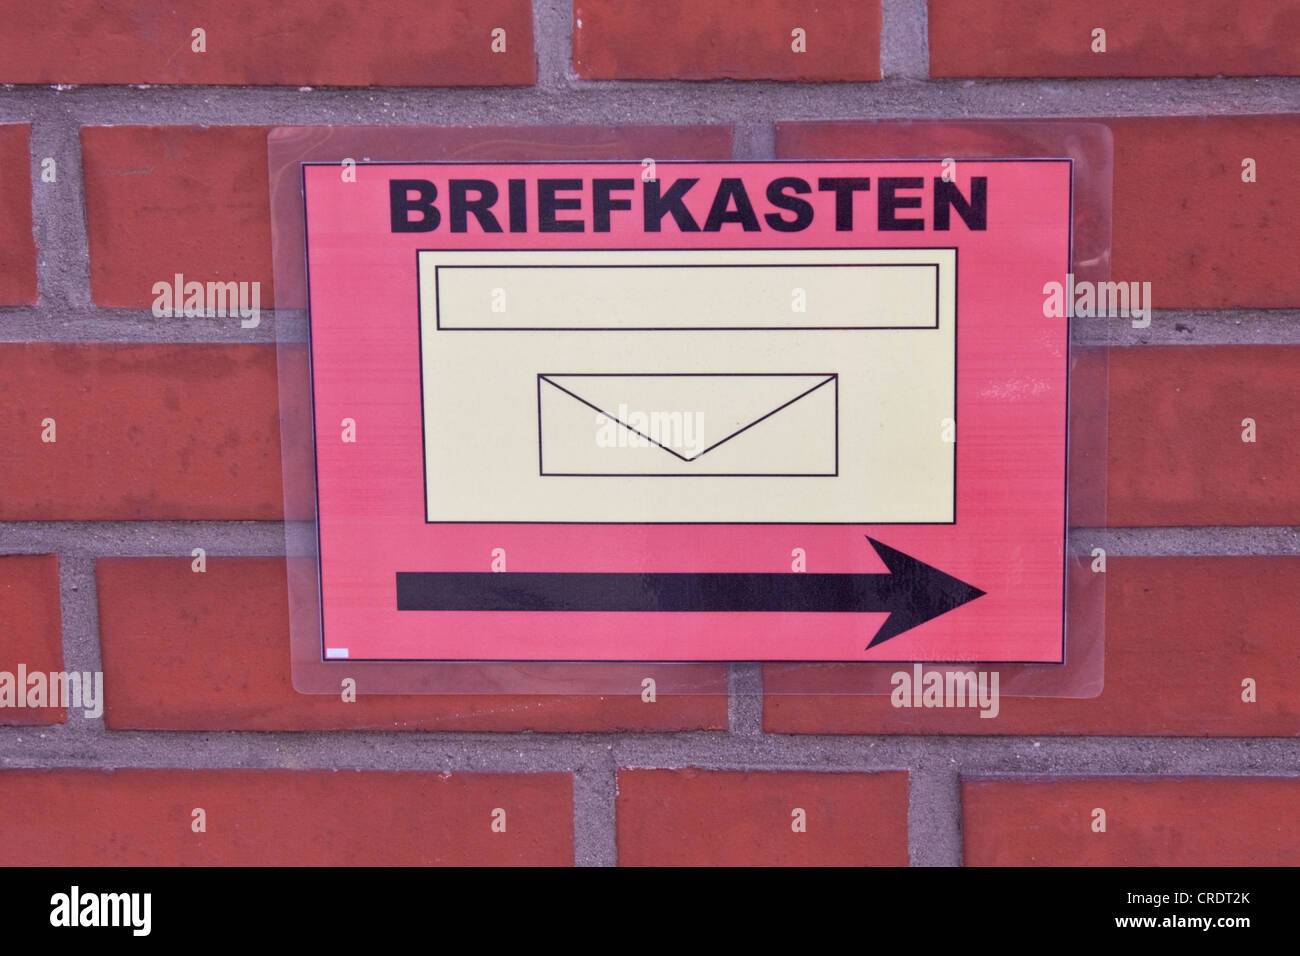 Sign 'Briefkasten' or 'letter box' with directional arrow Stock Photo